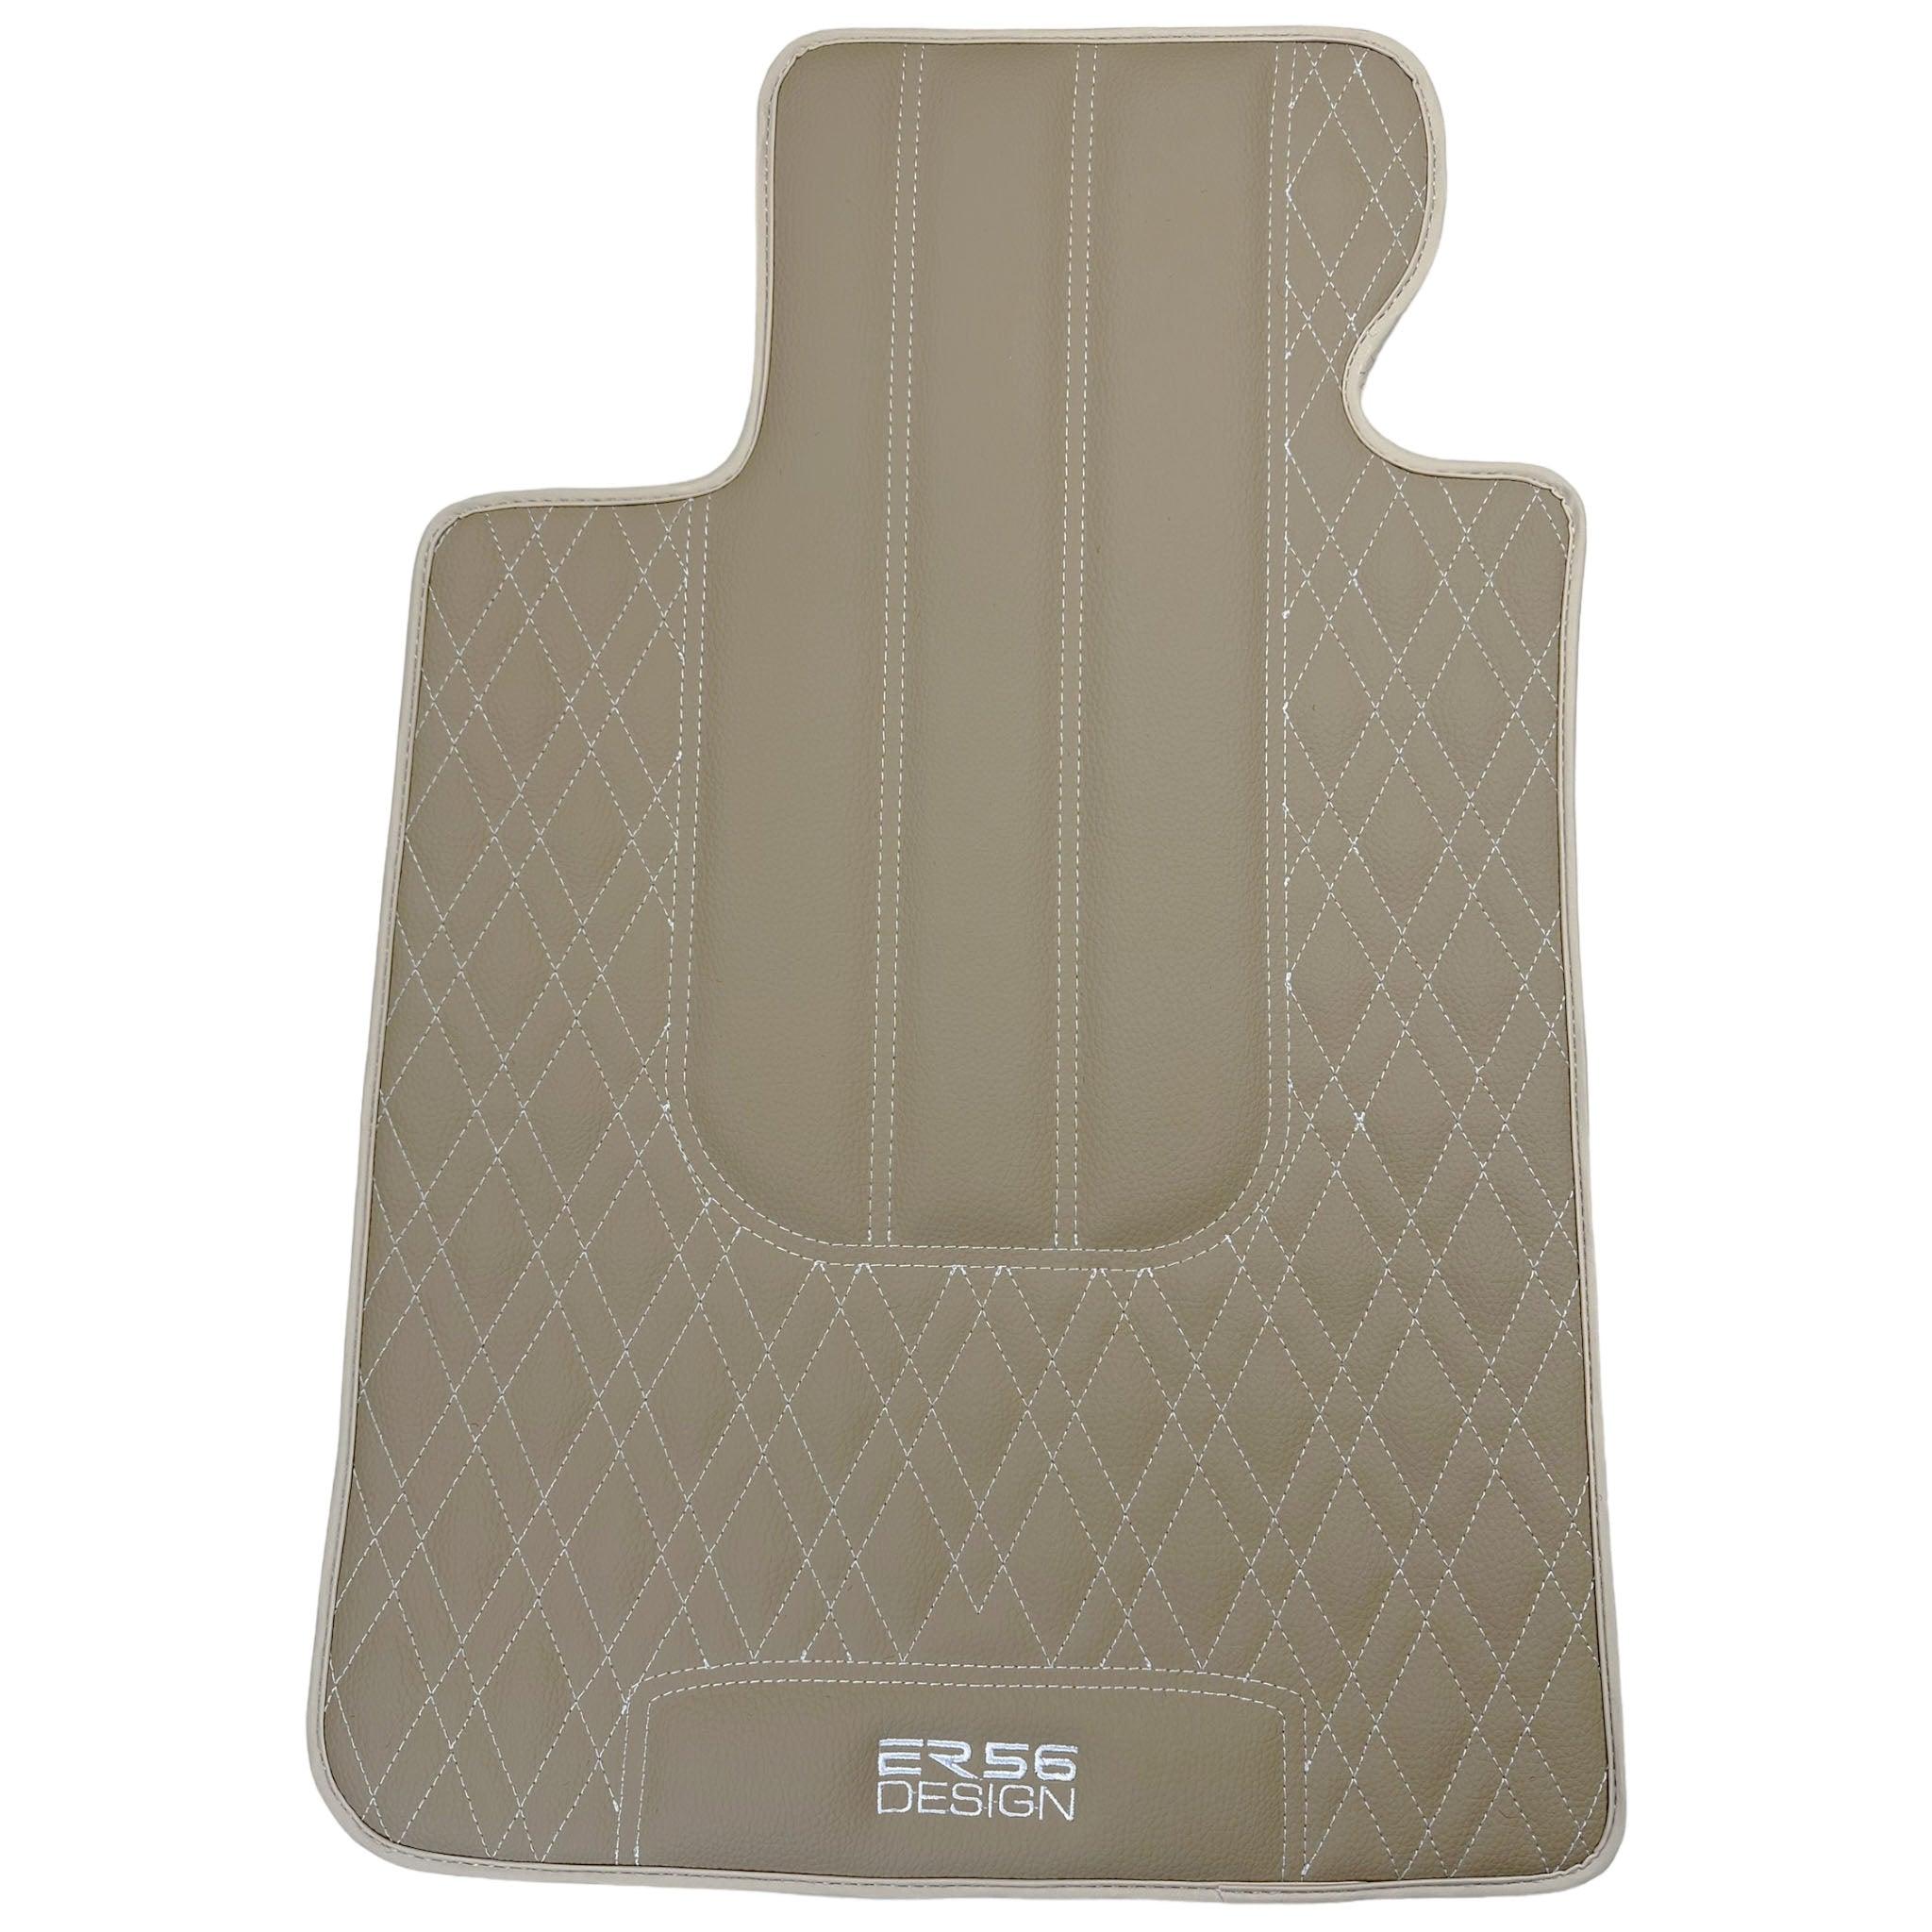 Beige Leather Floor Mats For BMW X6 Series F16